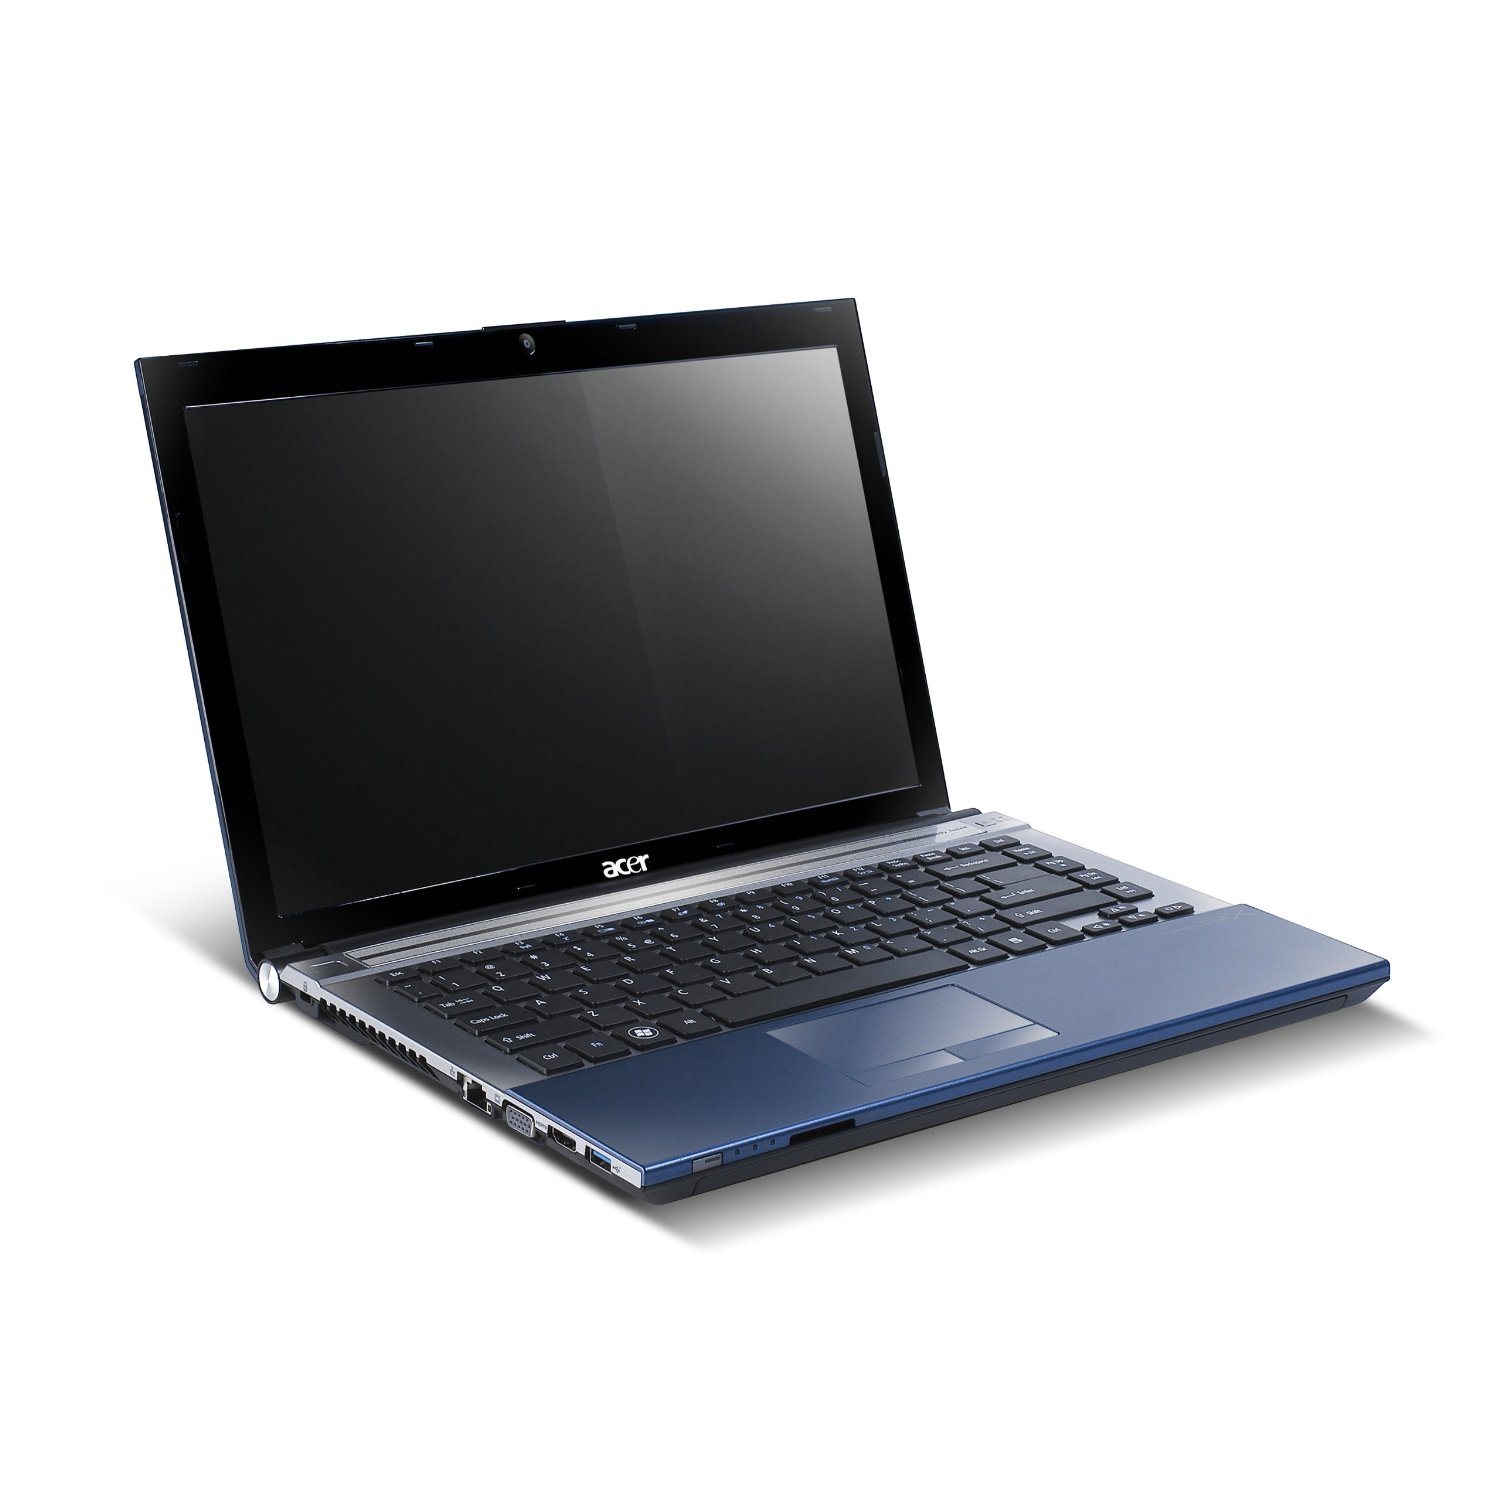 http://thetechjournal.com/wp-content/uploads/images/1108/1314641368-acer-aspire-timelinex-as4830t6642-14inch-laptop-1.jpg